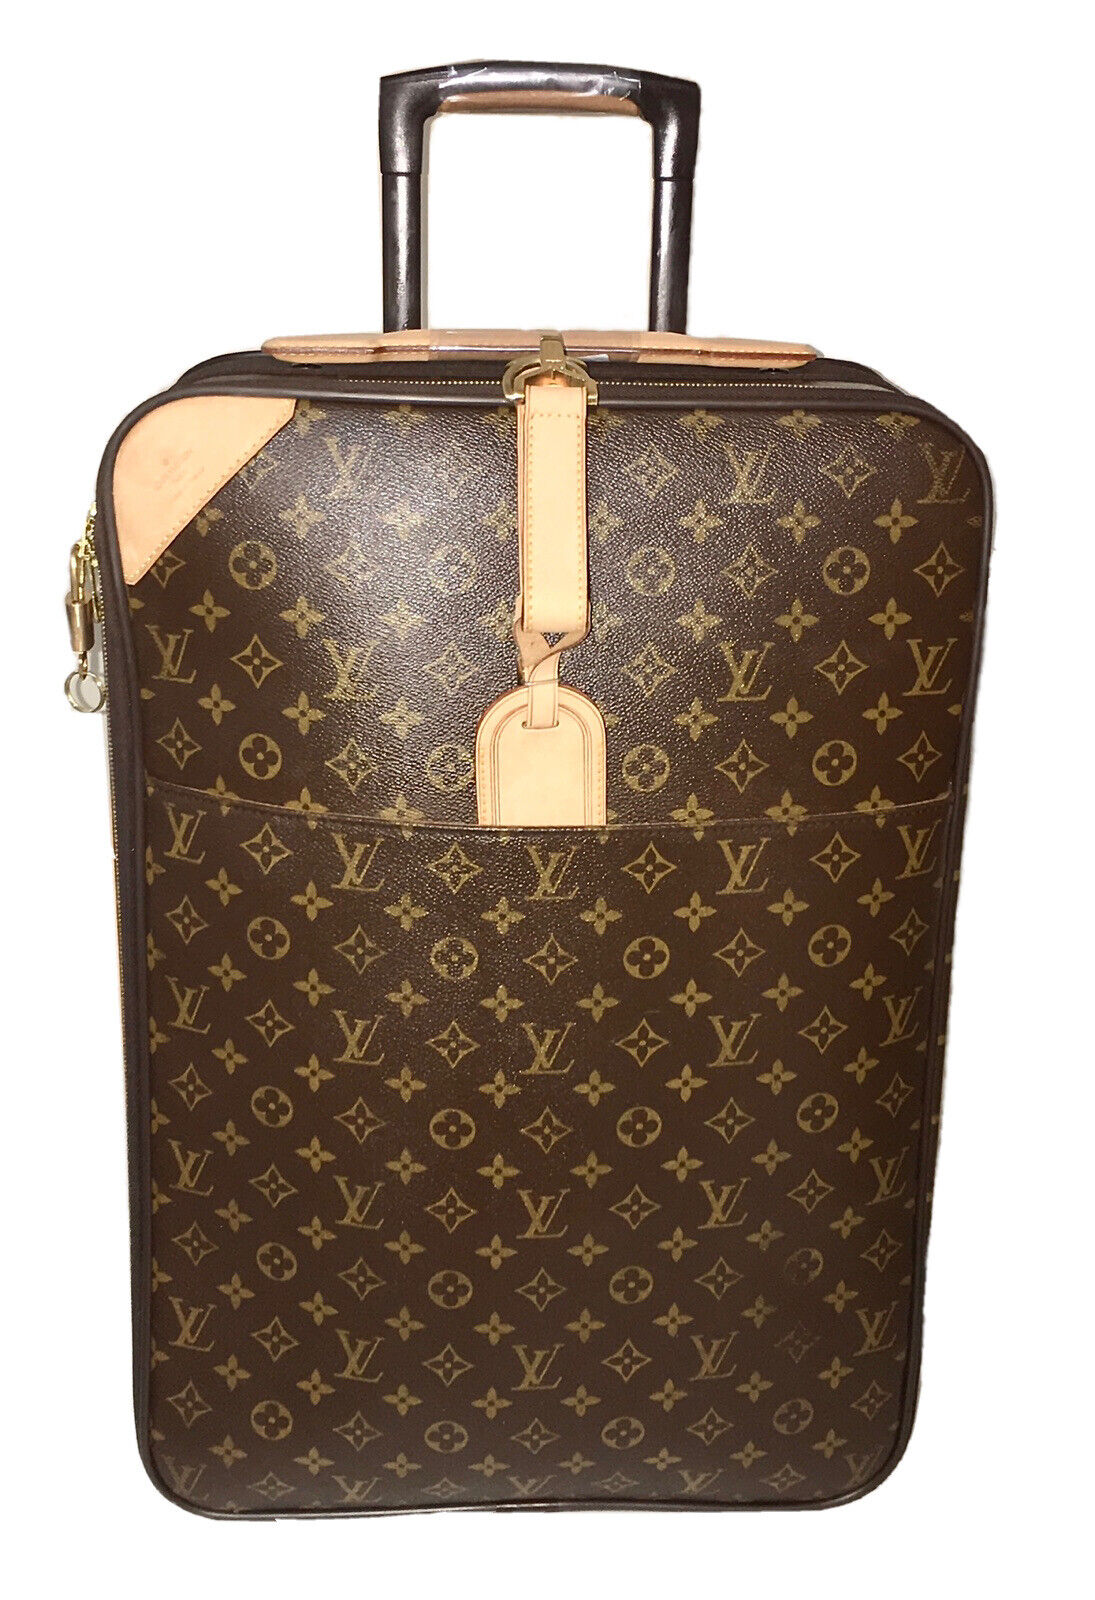 Louis Vuitton (SA) (Pty) Ltd  Luxury brand known for signature monogrammed  handbags & luggage, plus chic apparel